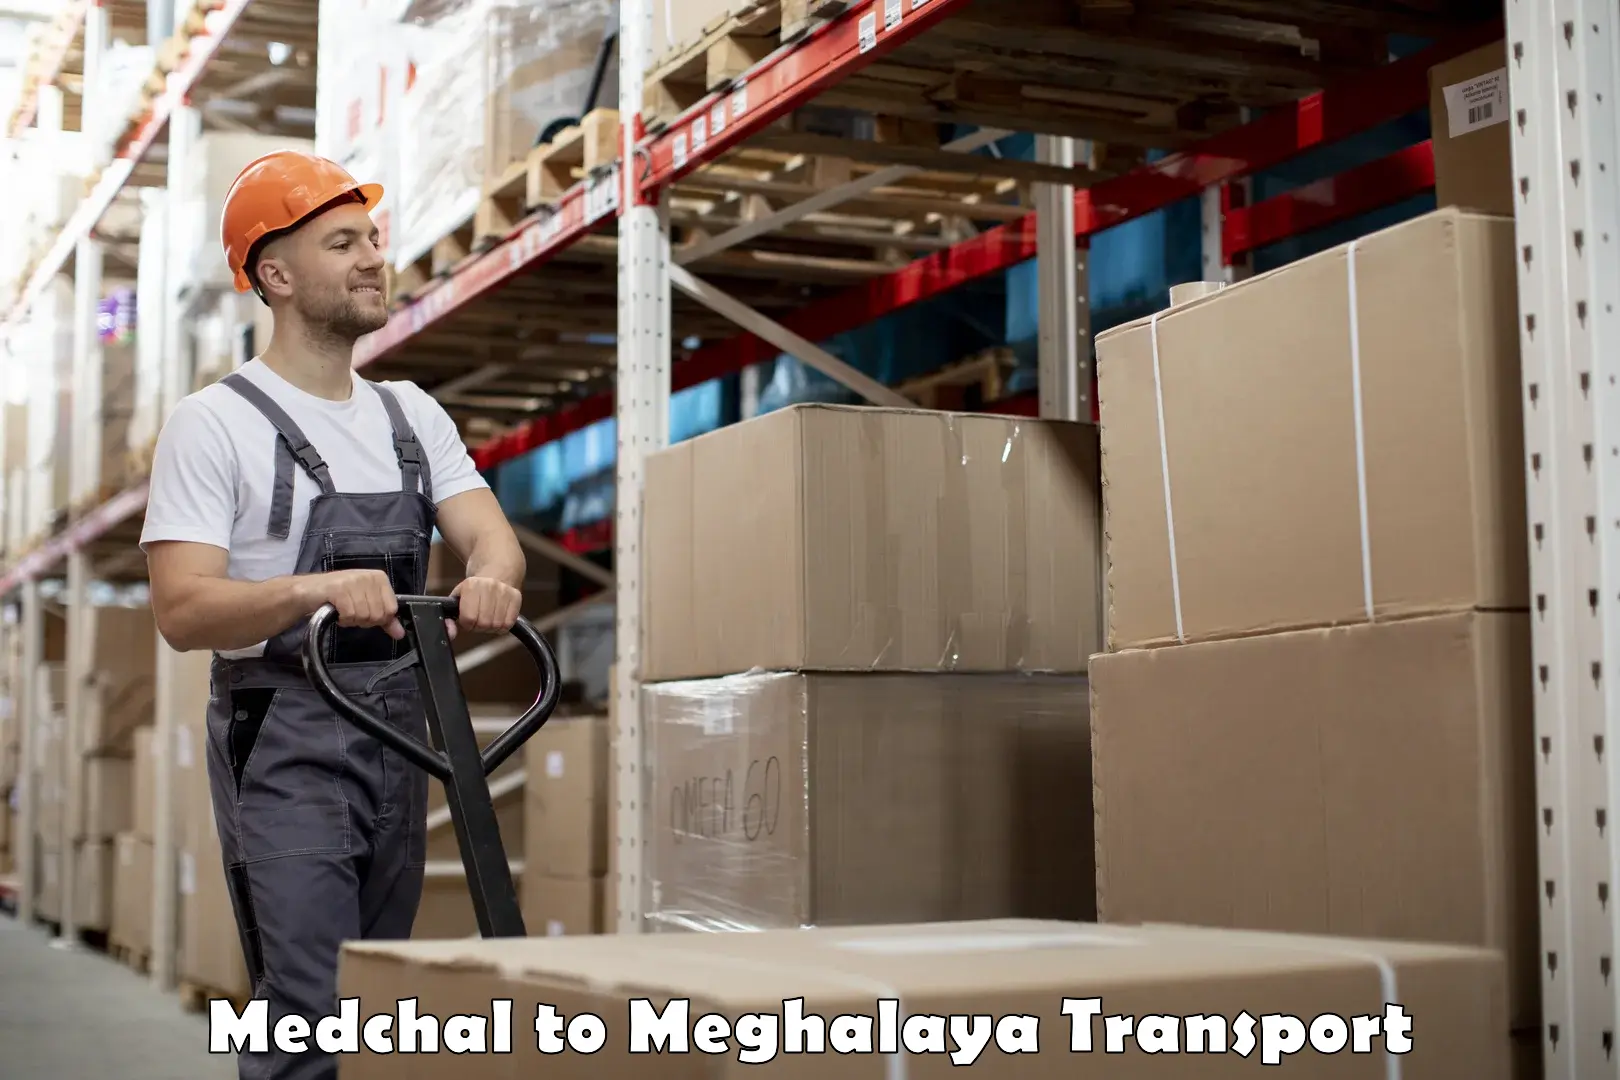 Express transport services Medchal to Marshillong